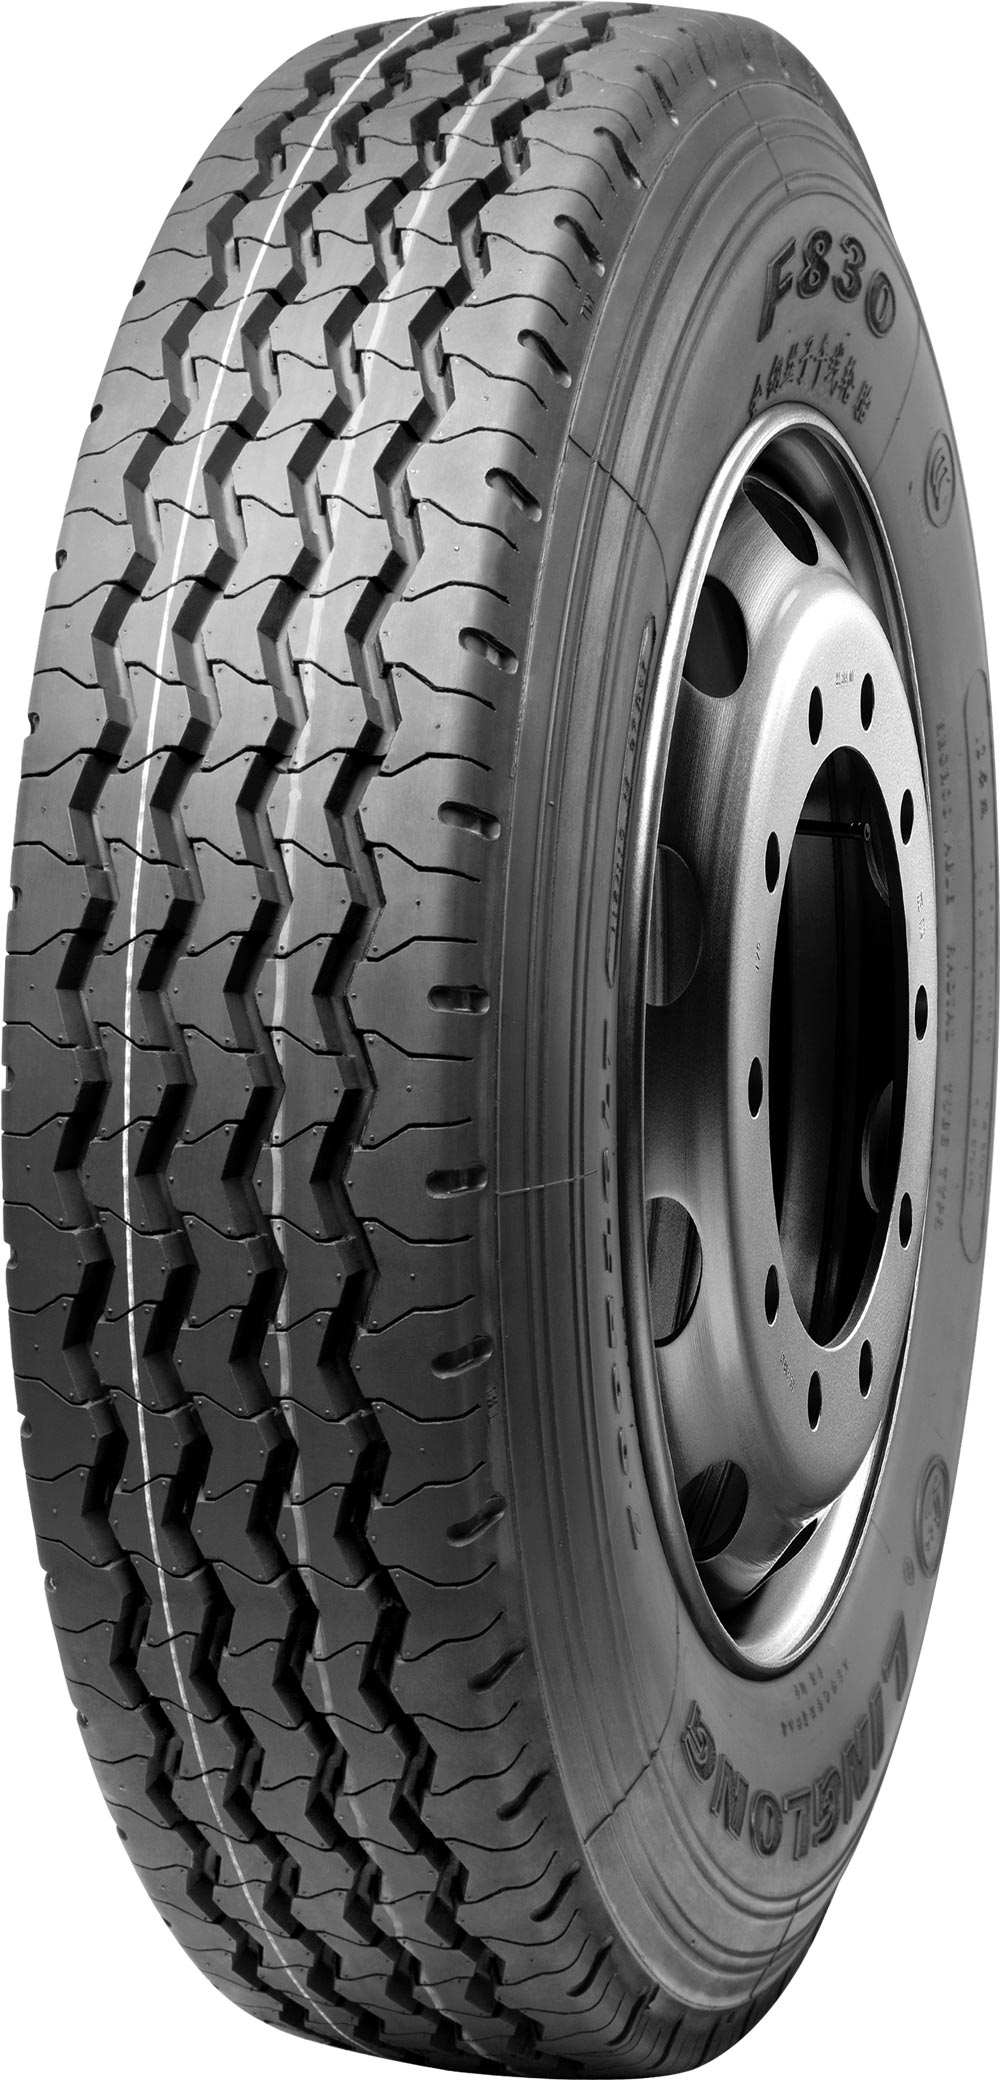 product_type-heavy_tires LINGLONG F830 14PR 7 R16 117L